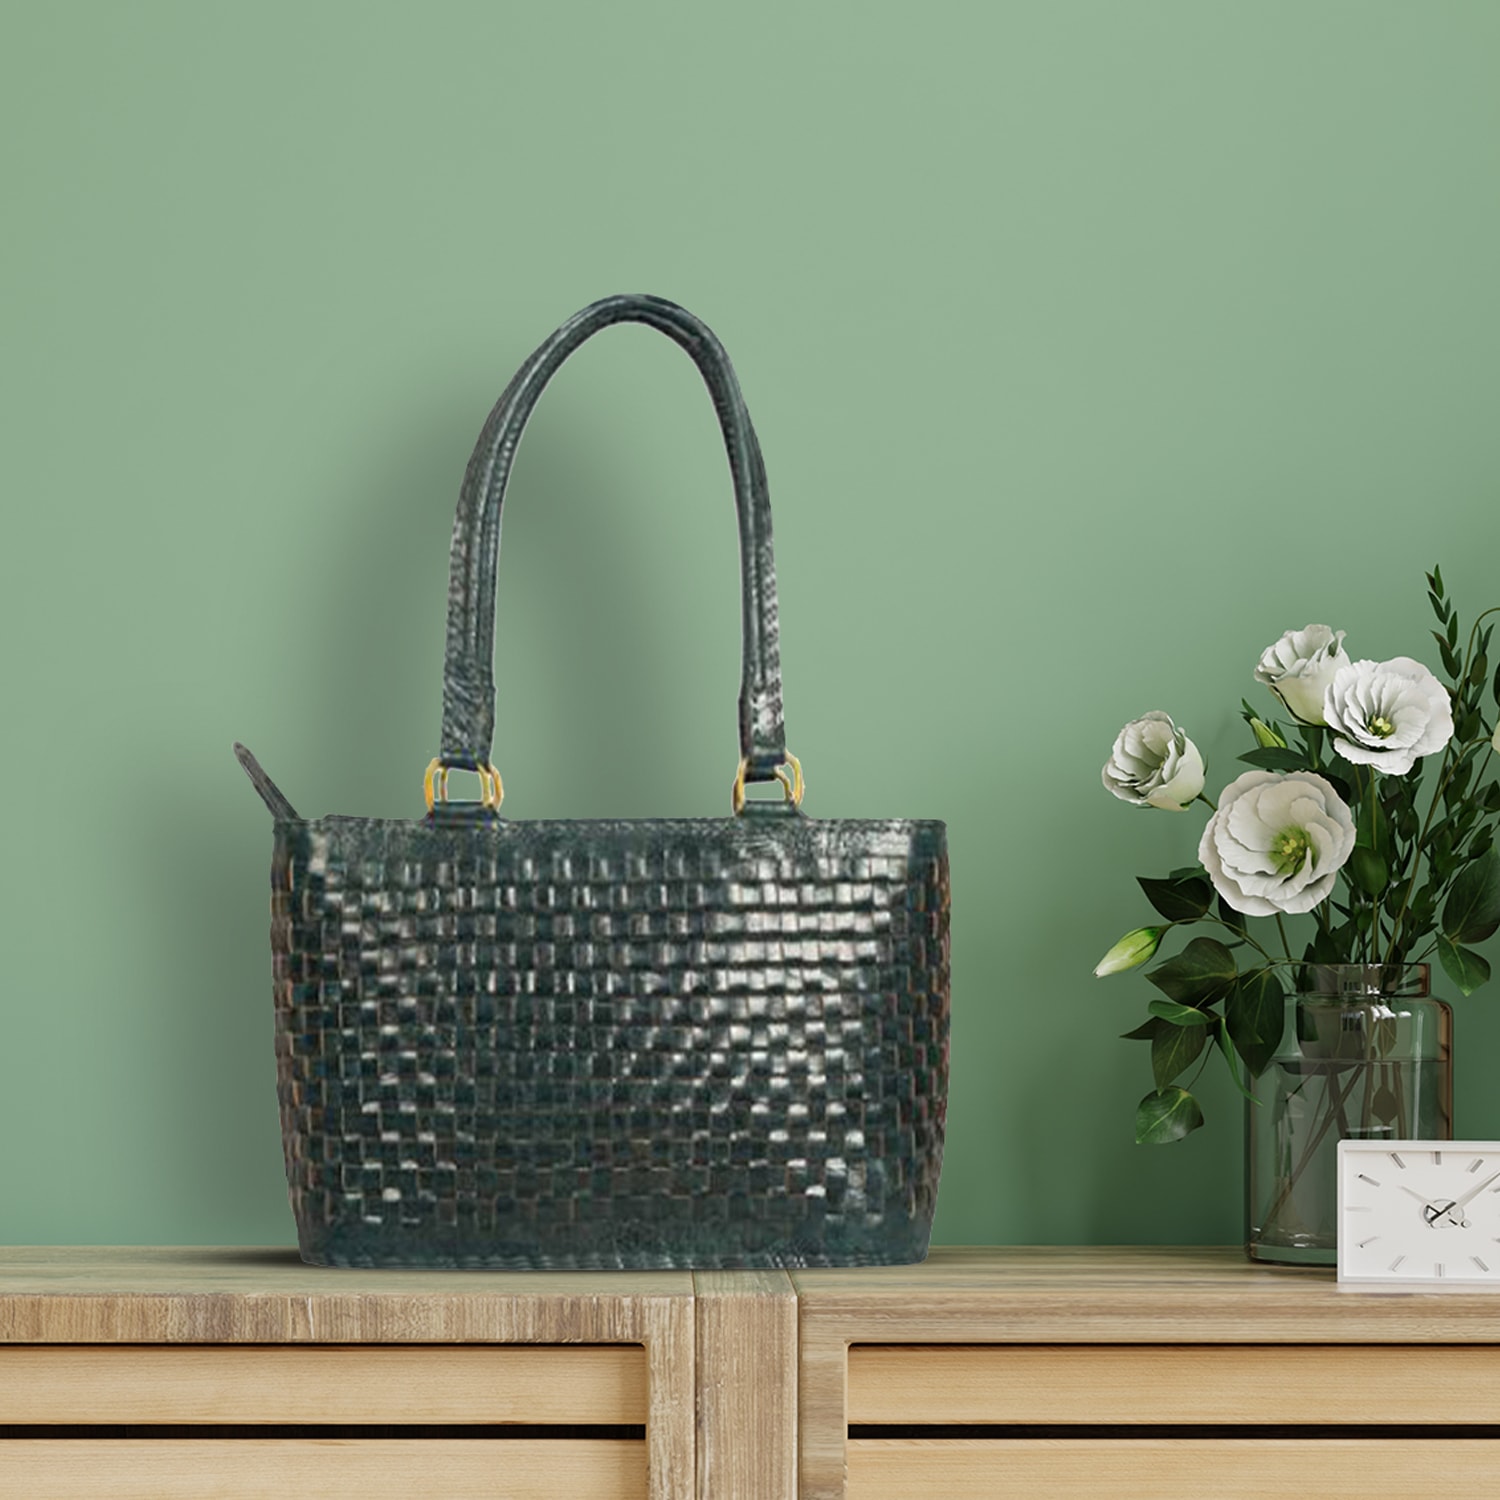 Details more than 69 woven leather bag super hot - in.duhocakina